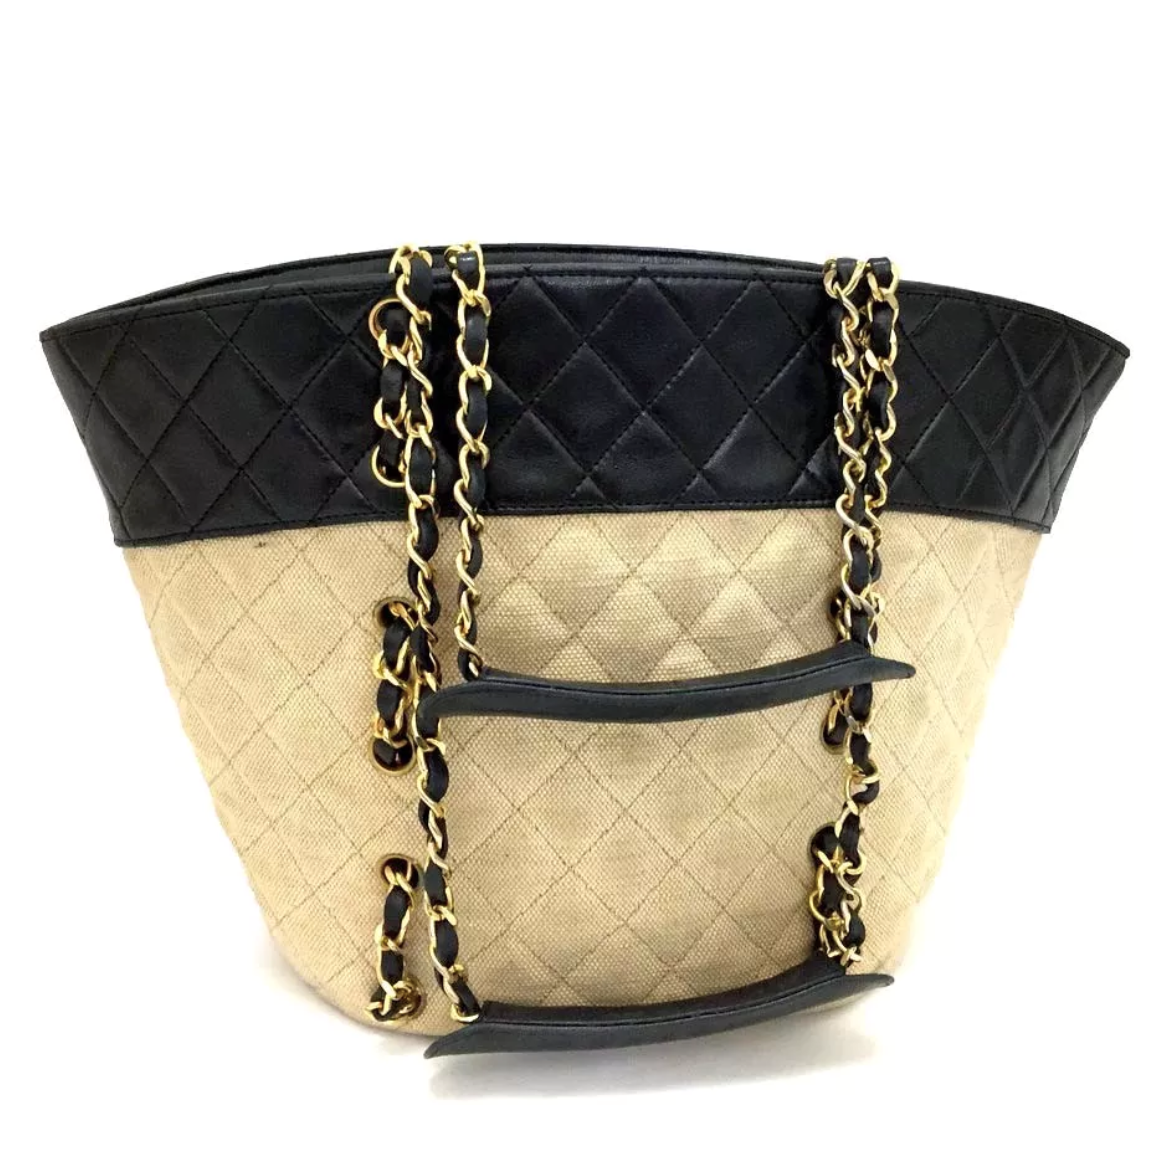 Chanel Vintage Timeless Quilted Lambskin Shopper Tote Bag